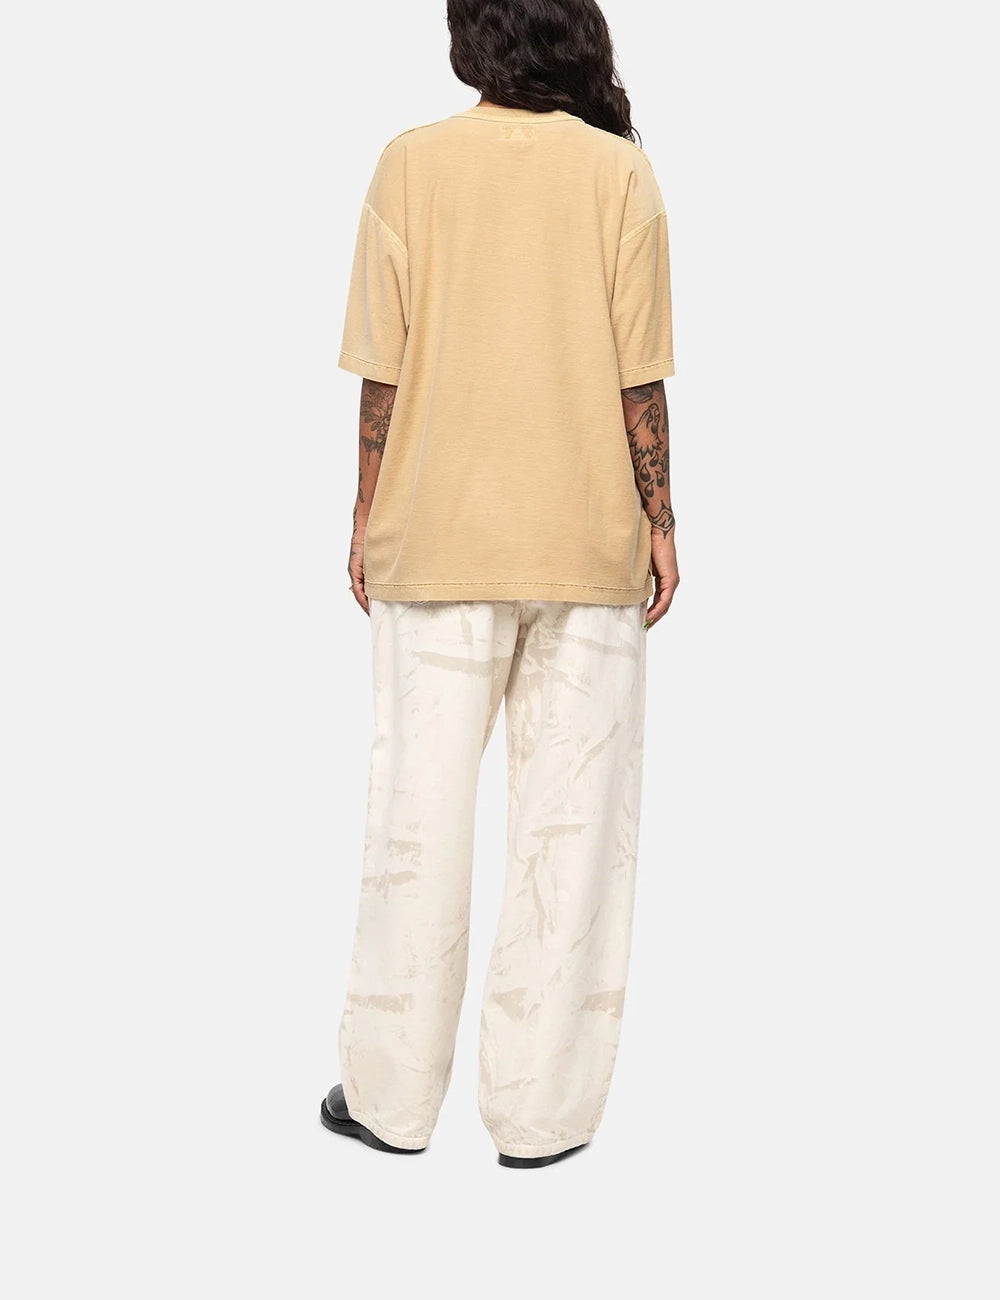 STUSSY PIG DYED INSIDE OUT CREW